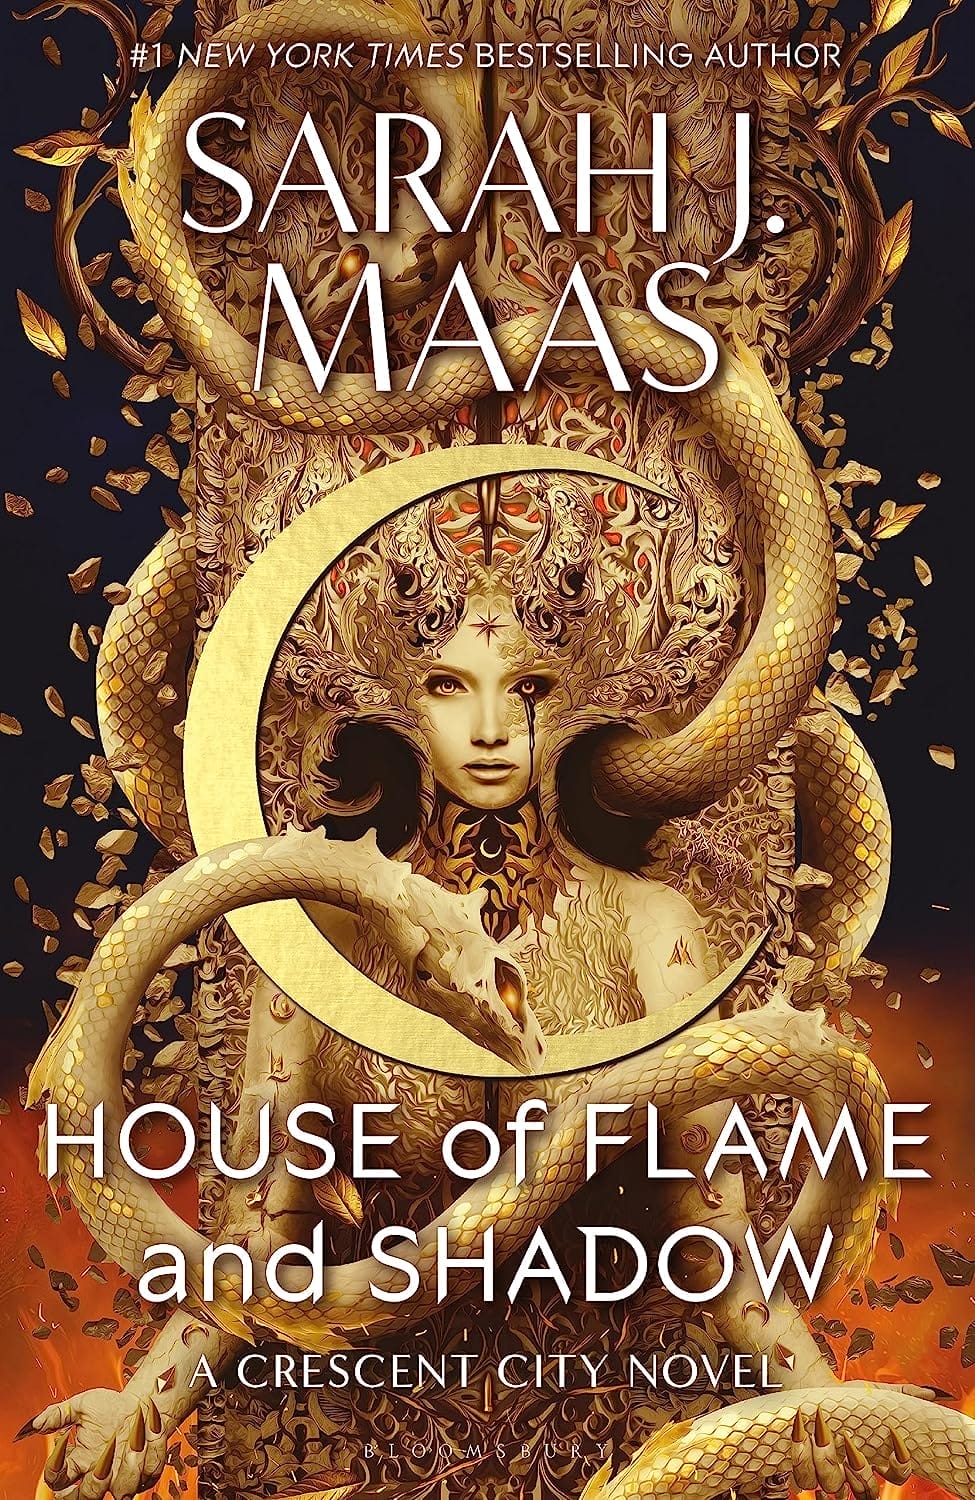 crescent city series: house of flame and shadow